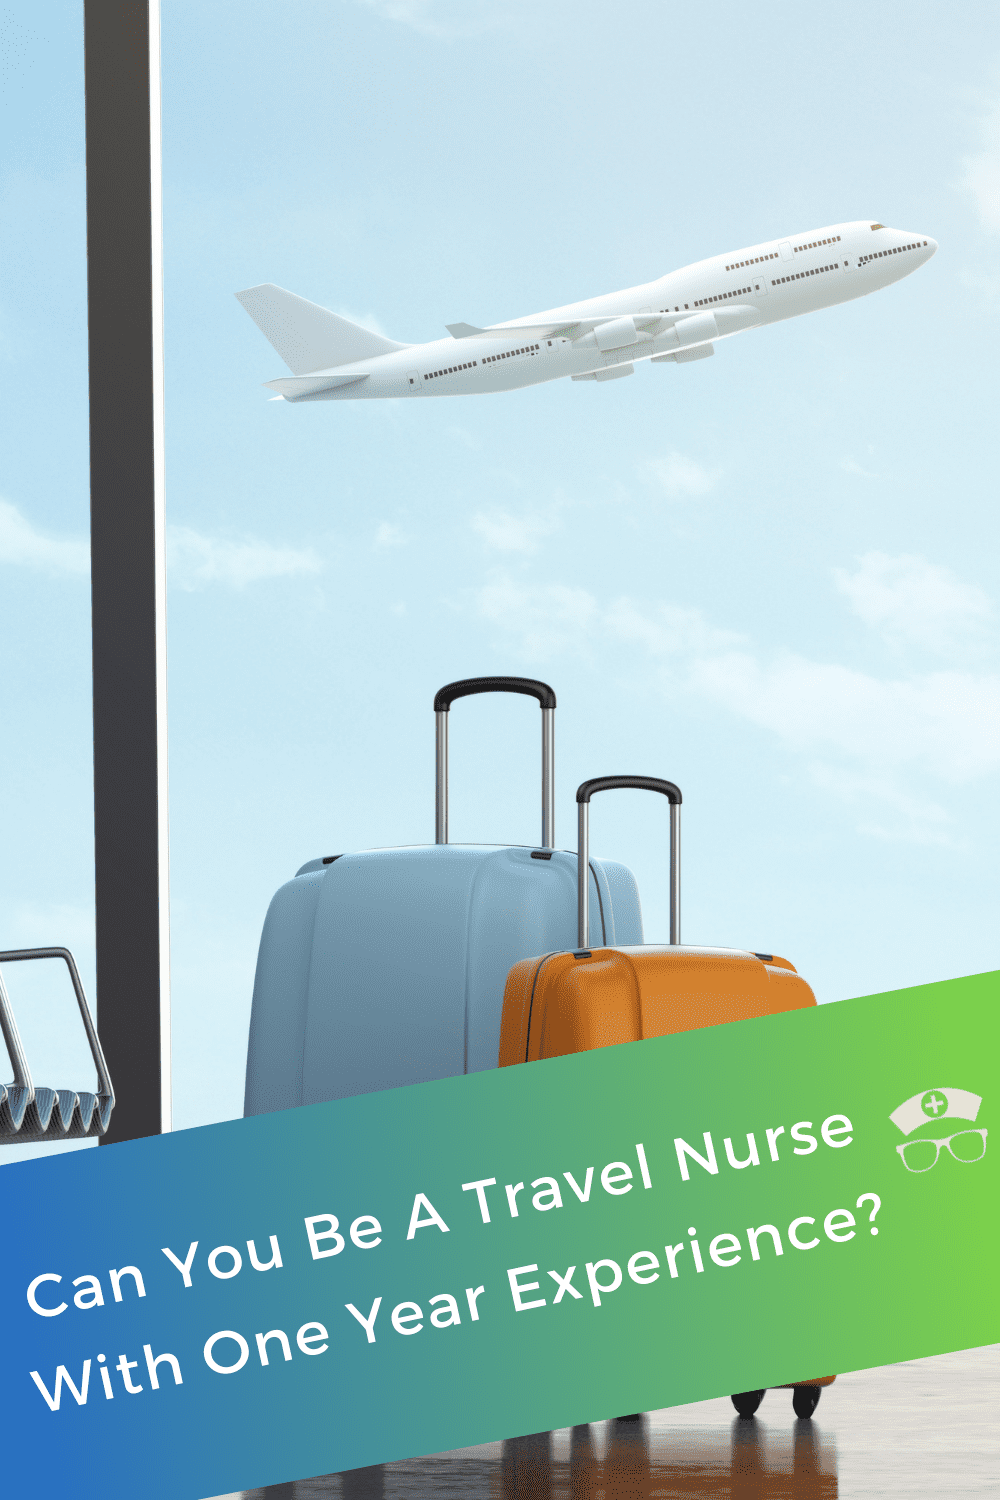 can you travel nurse with 1 year experience